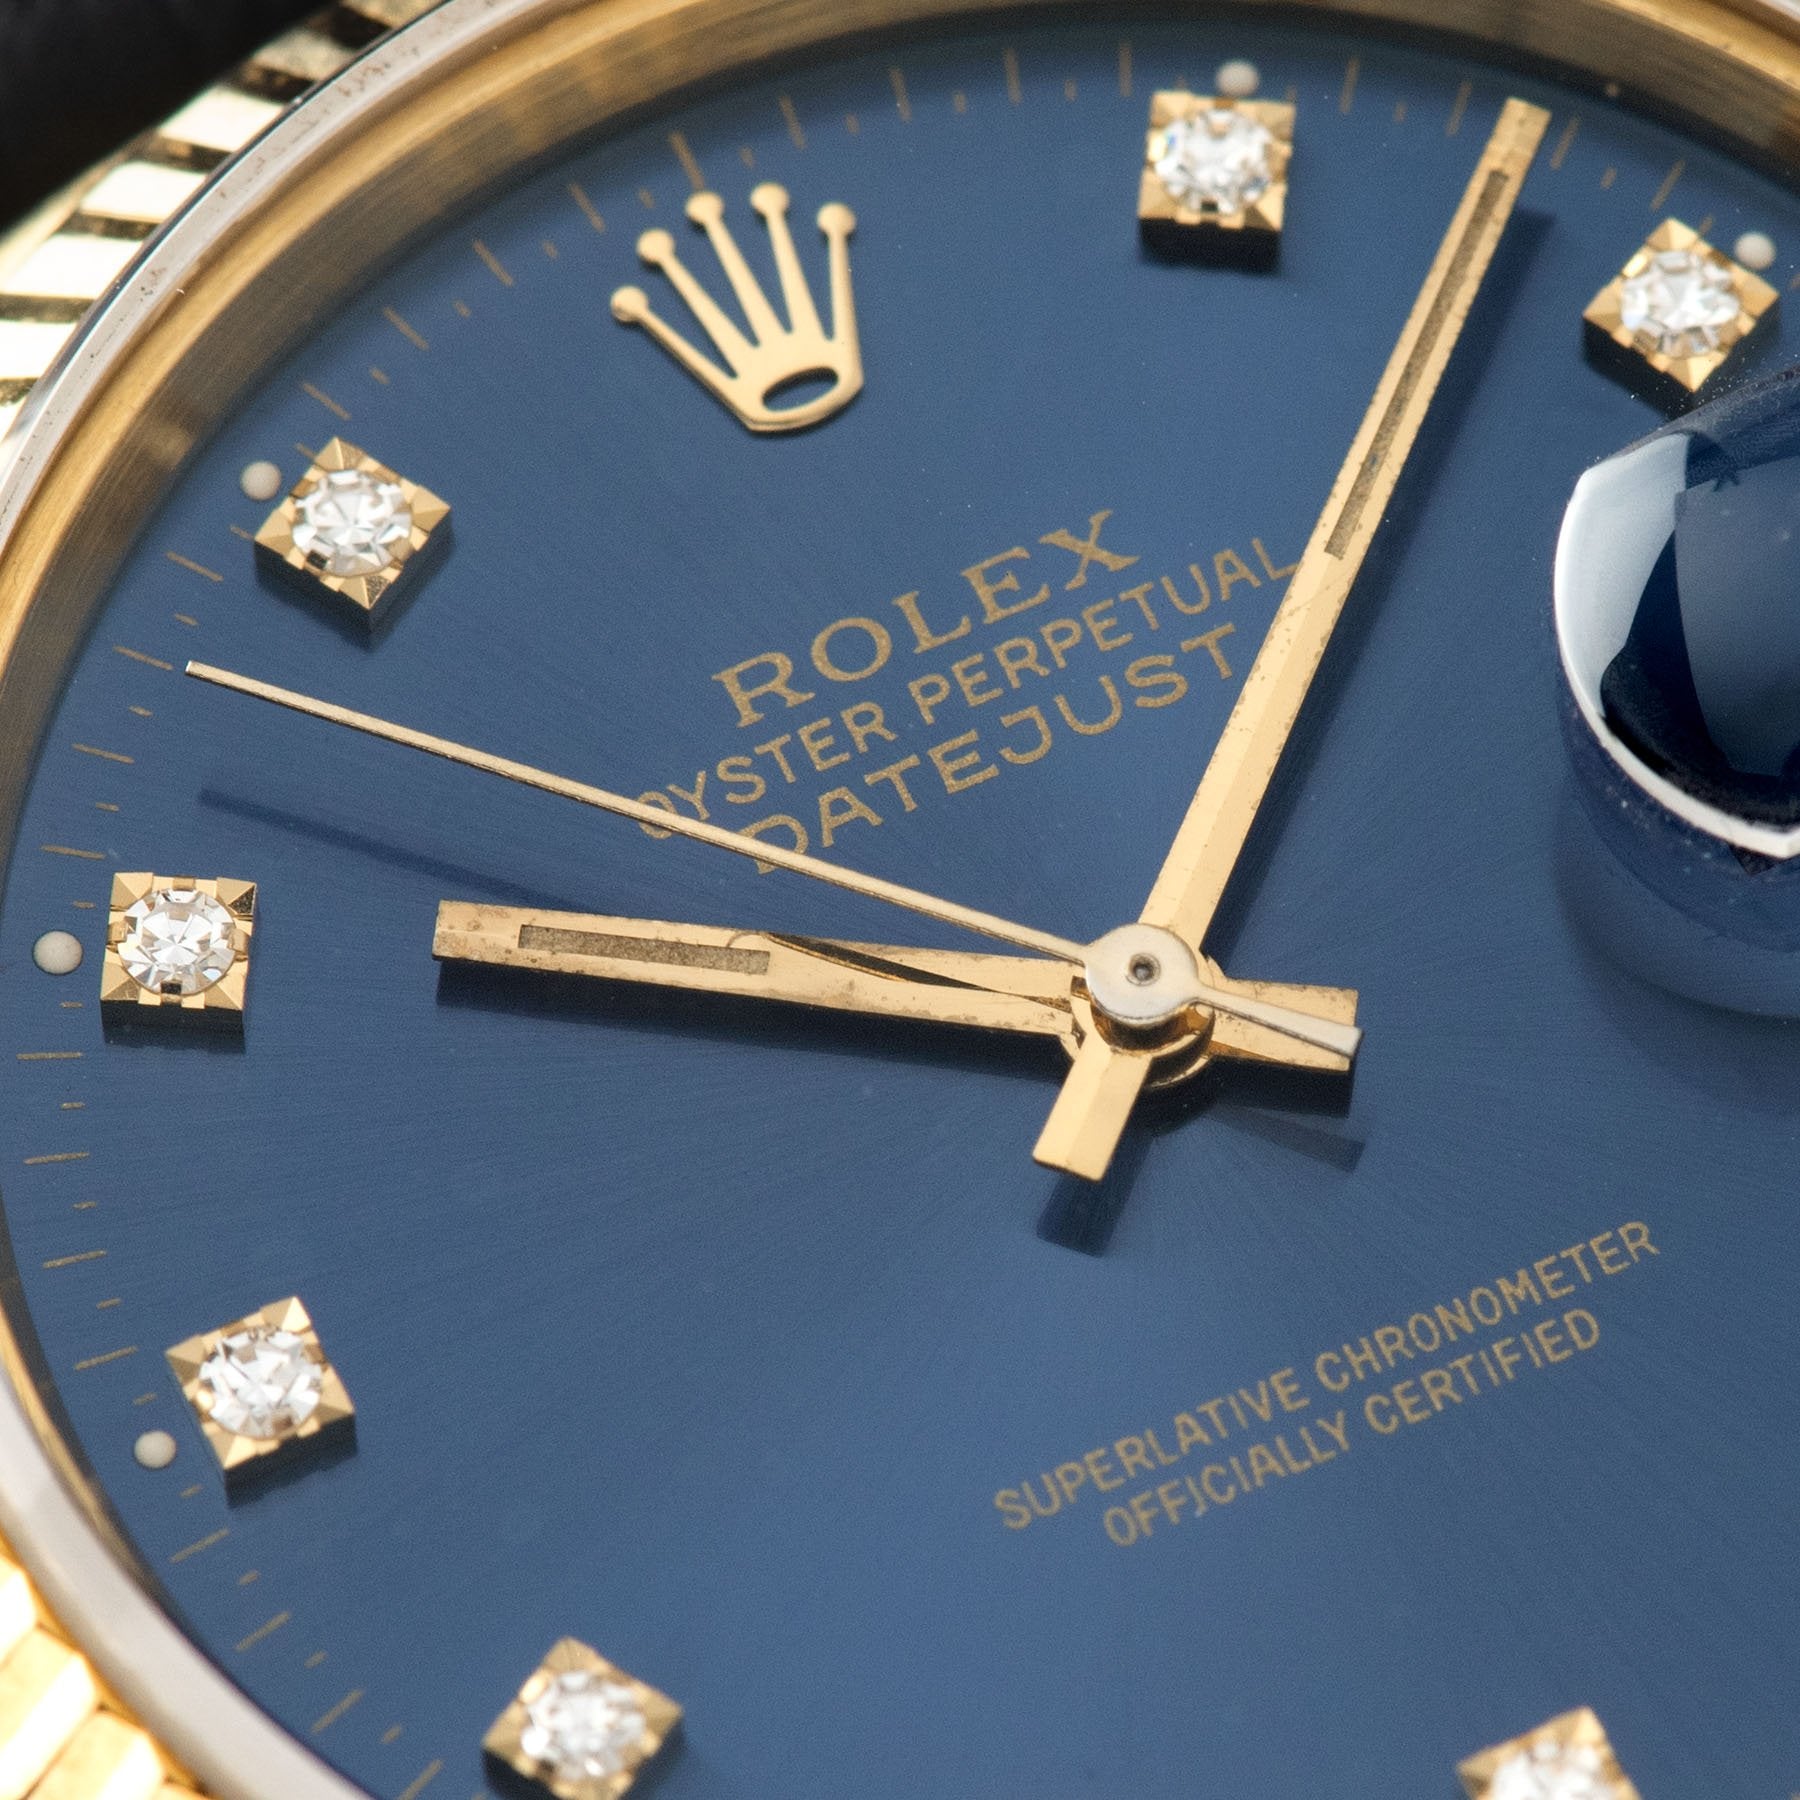 Rolex Datejust Yellow Gold 16018 Blue Diamond Hours Dial